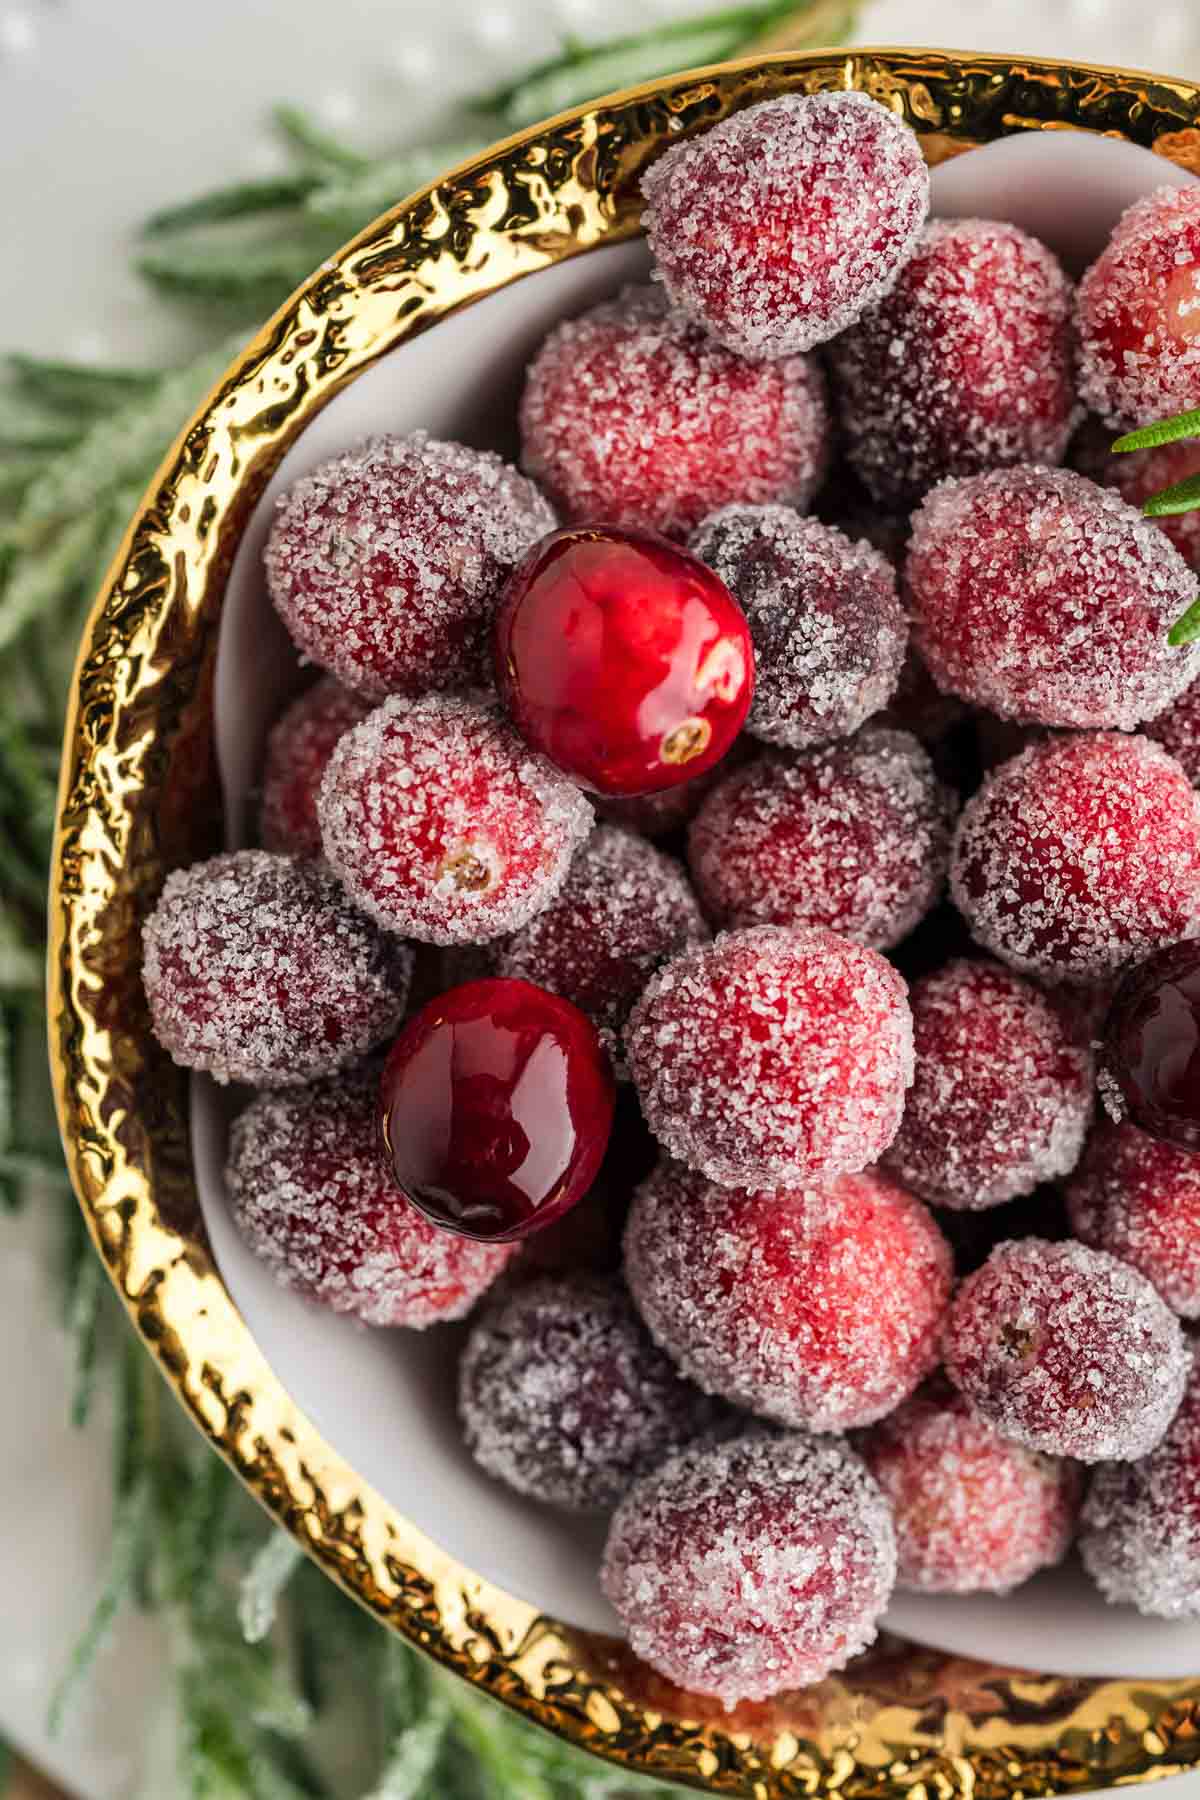 An up close image showing sugared cranberries with the sugar dried onto the fresh cranberries.